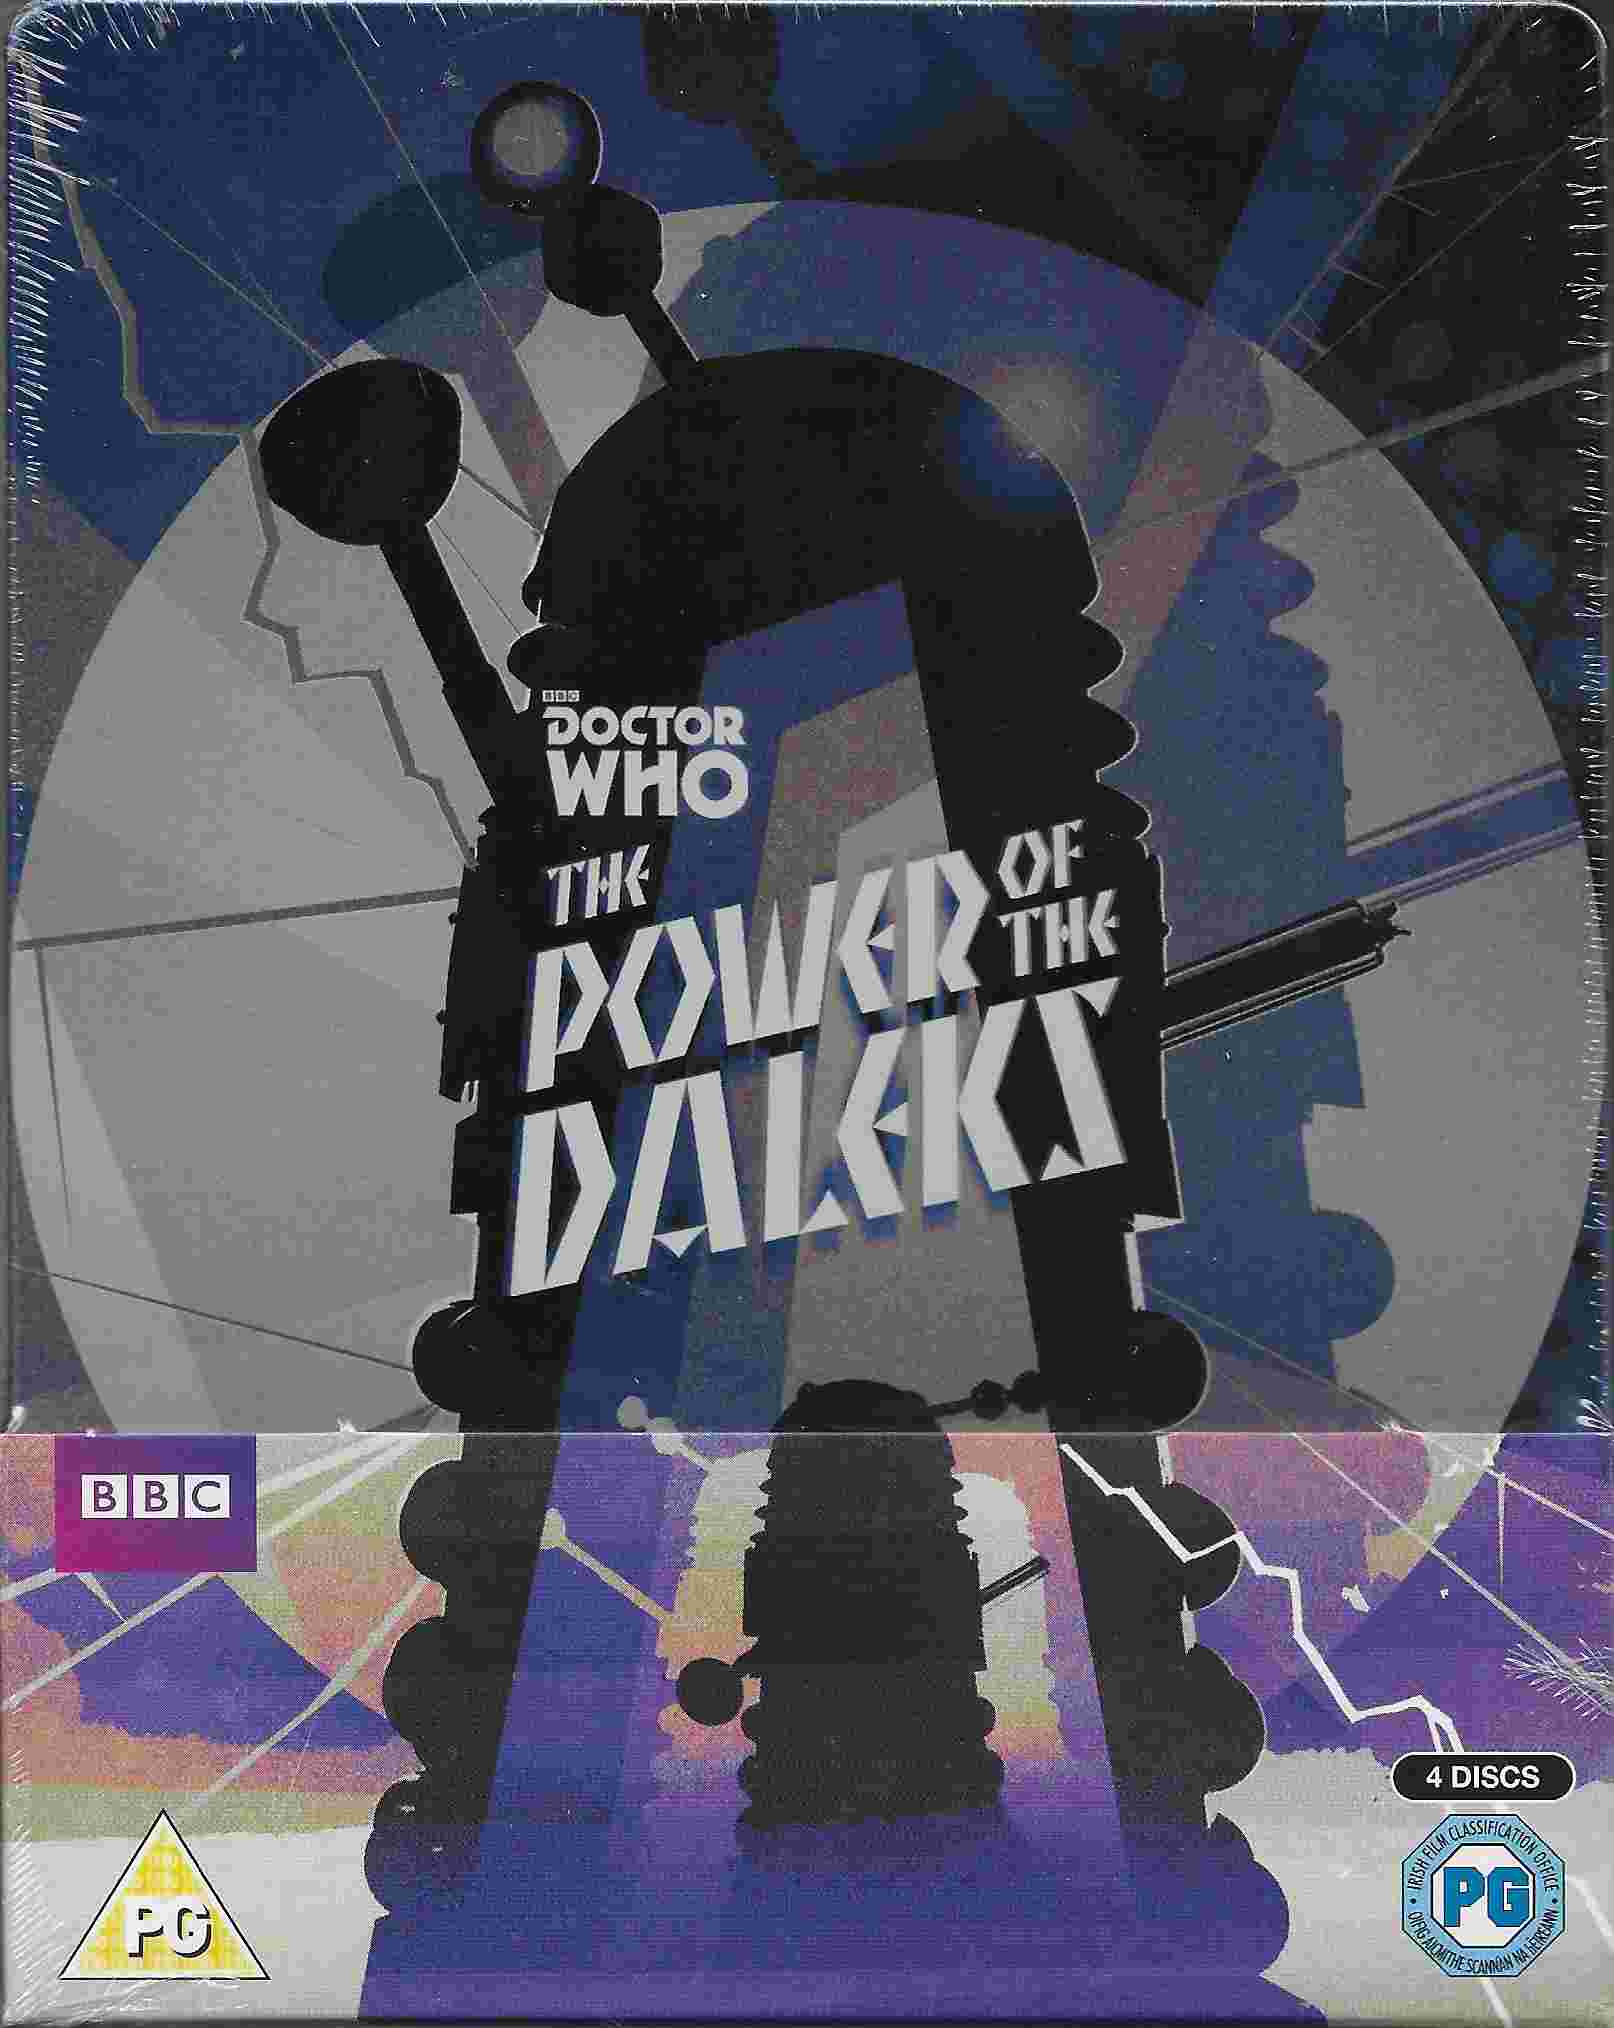 Picture of BBCBD 0390 Doctor Who - The power of the Daleks by artist David Whitaker / Dennis Spooner from the BBC records and Tapes library